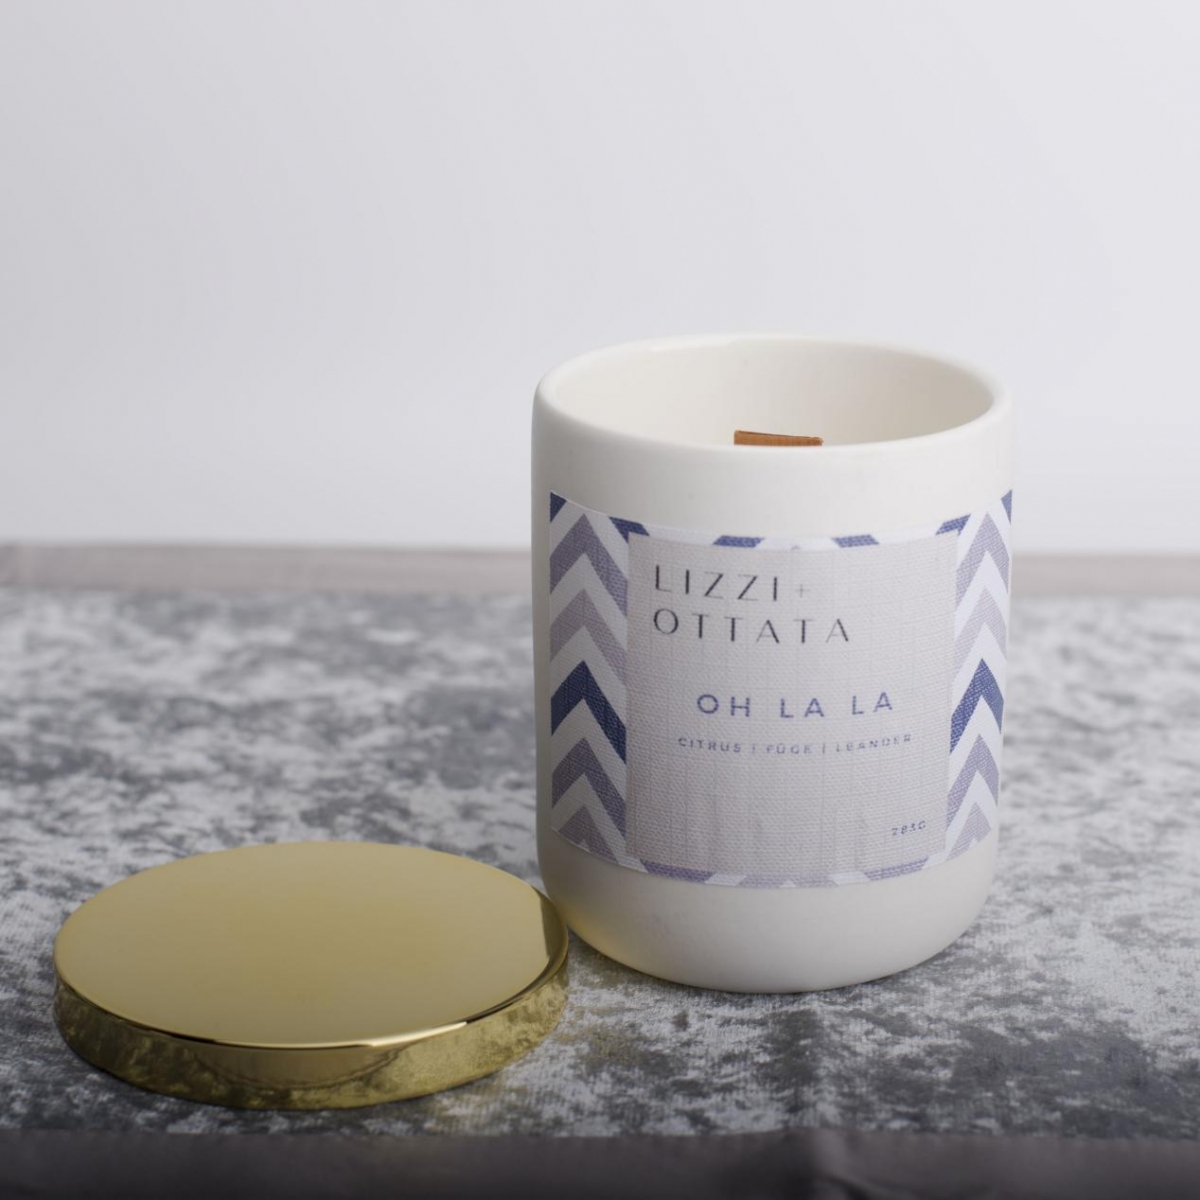 Scented Candles：Creed Aventus ,Soy Candles ,China Factory ,Wholesale Price ,White Ceramic Jar ,China Factory ,Price-HOWCANDLE-Candles,Scented Candles,Aromatherapy Candles,Soy Candles,Vegan Candles,Jar Candles,Pillar Candles,Candle Gift Sets,Essential Oils,Reed Diffuser,Candle Holder,